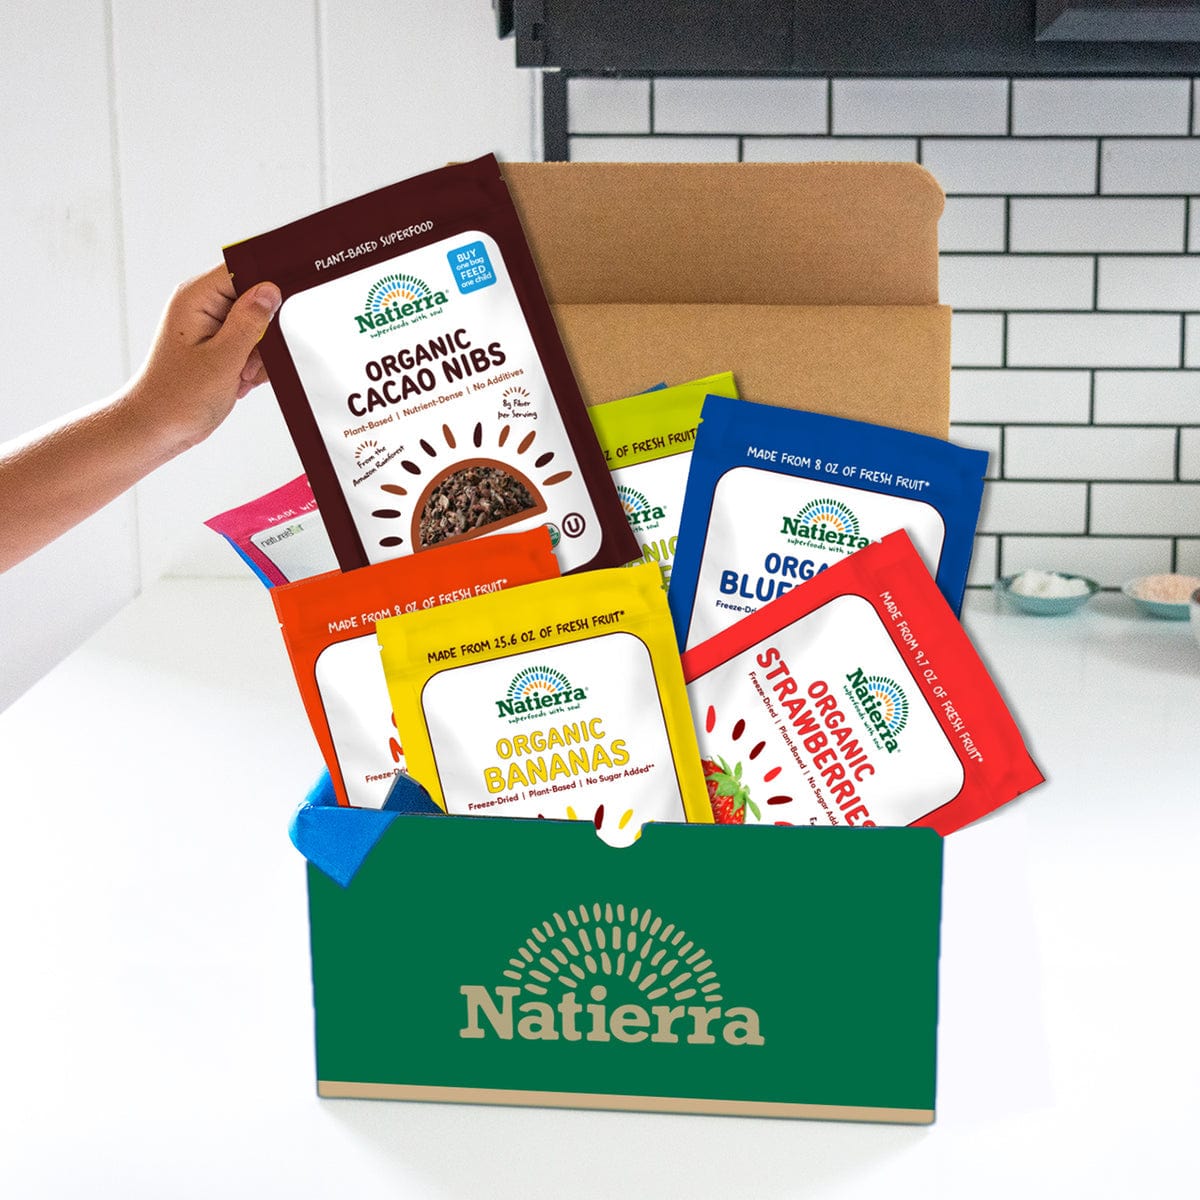 Natierra Organic Freeze Dried Fruit bags and organic cacao nibs bag on a subscription box